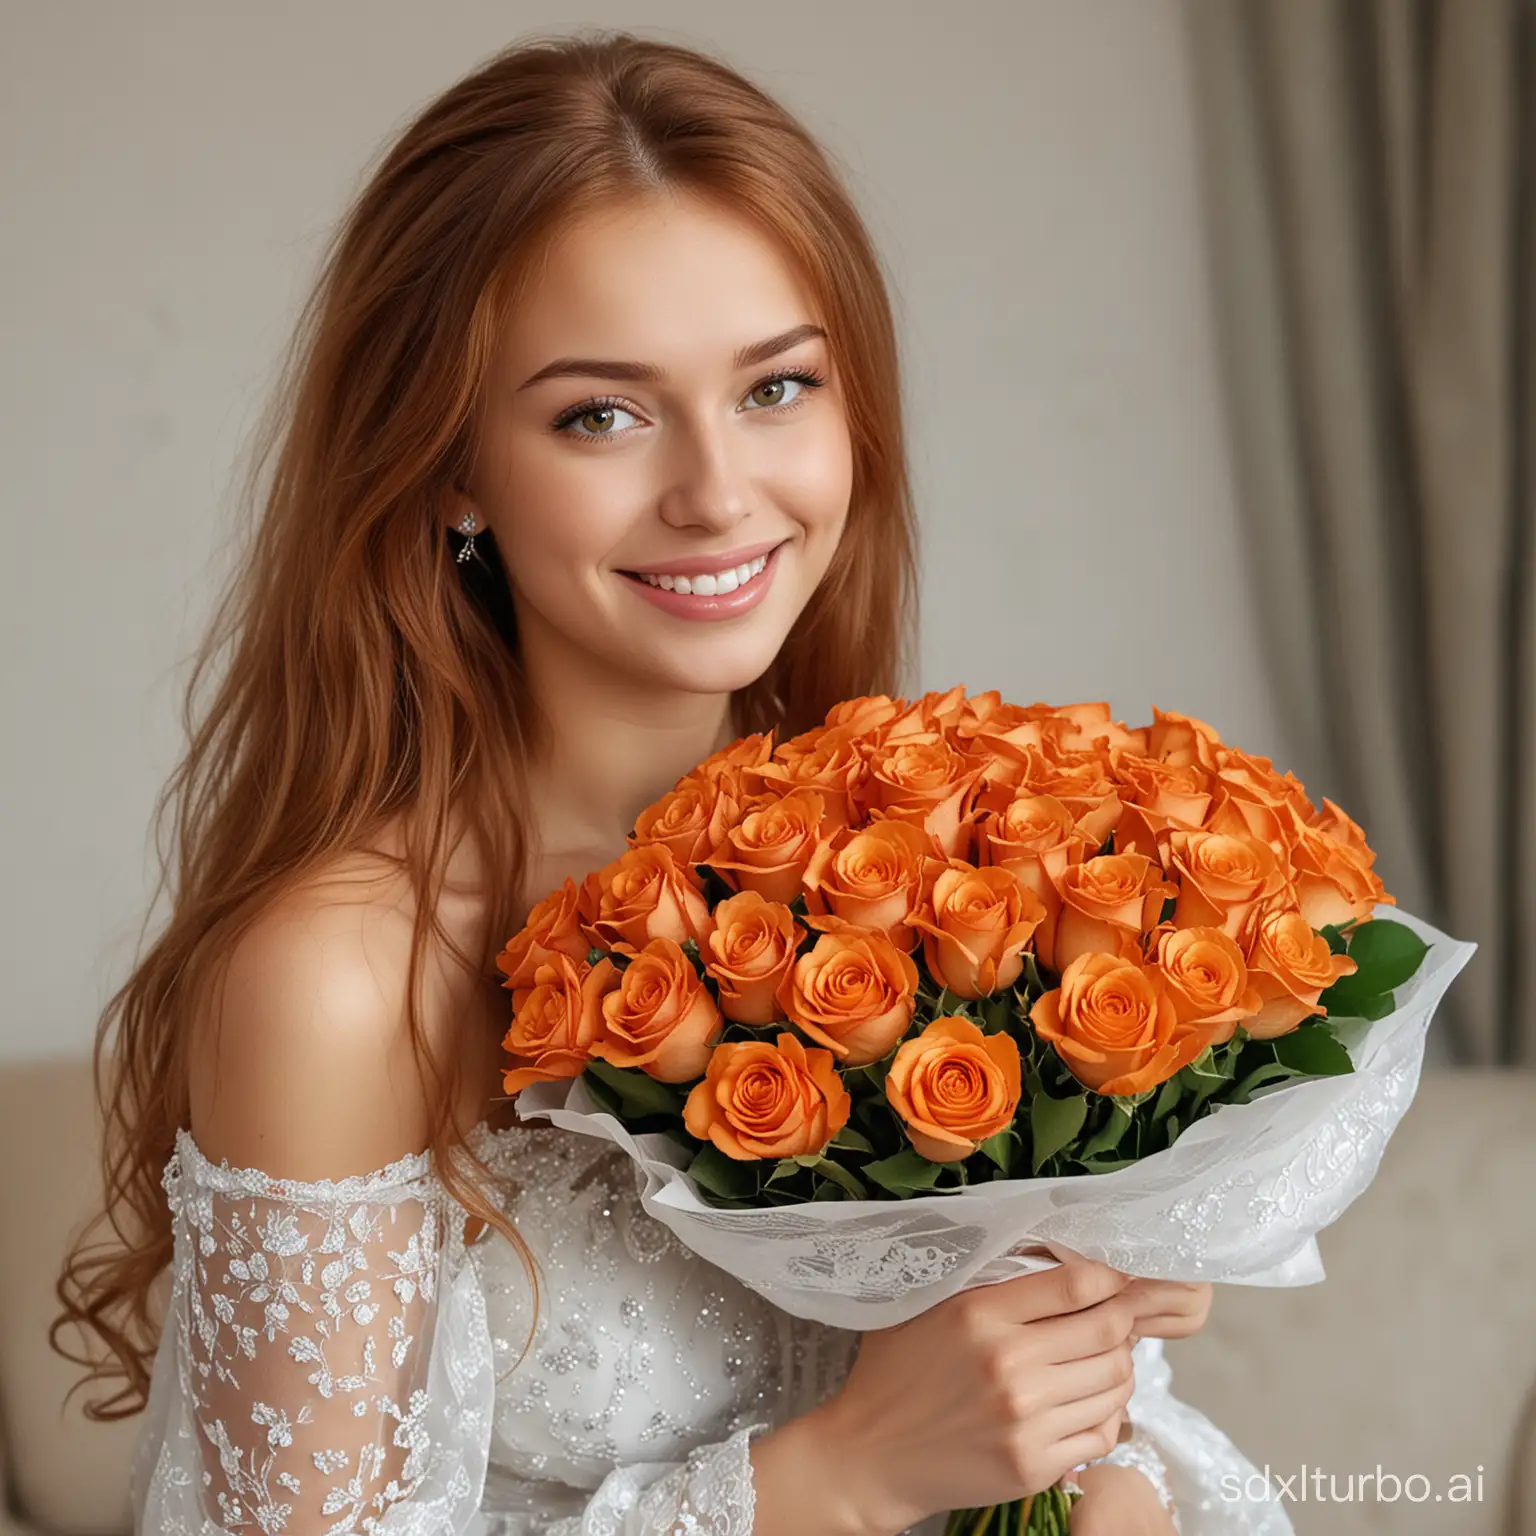 Graceful-Russian-Girl-in-Elegant-Evening-Gown-with-Bouquet-of-101-Orange-Roses